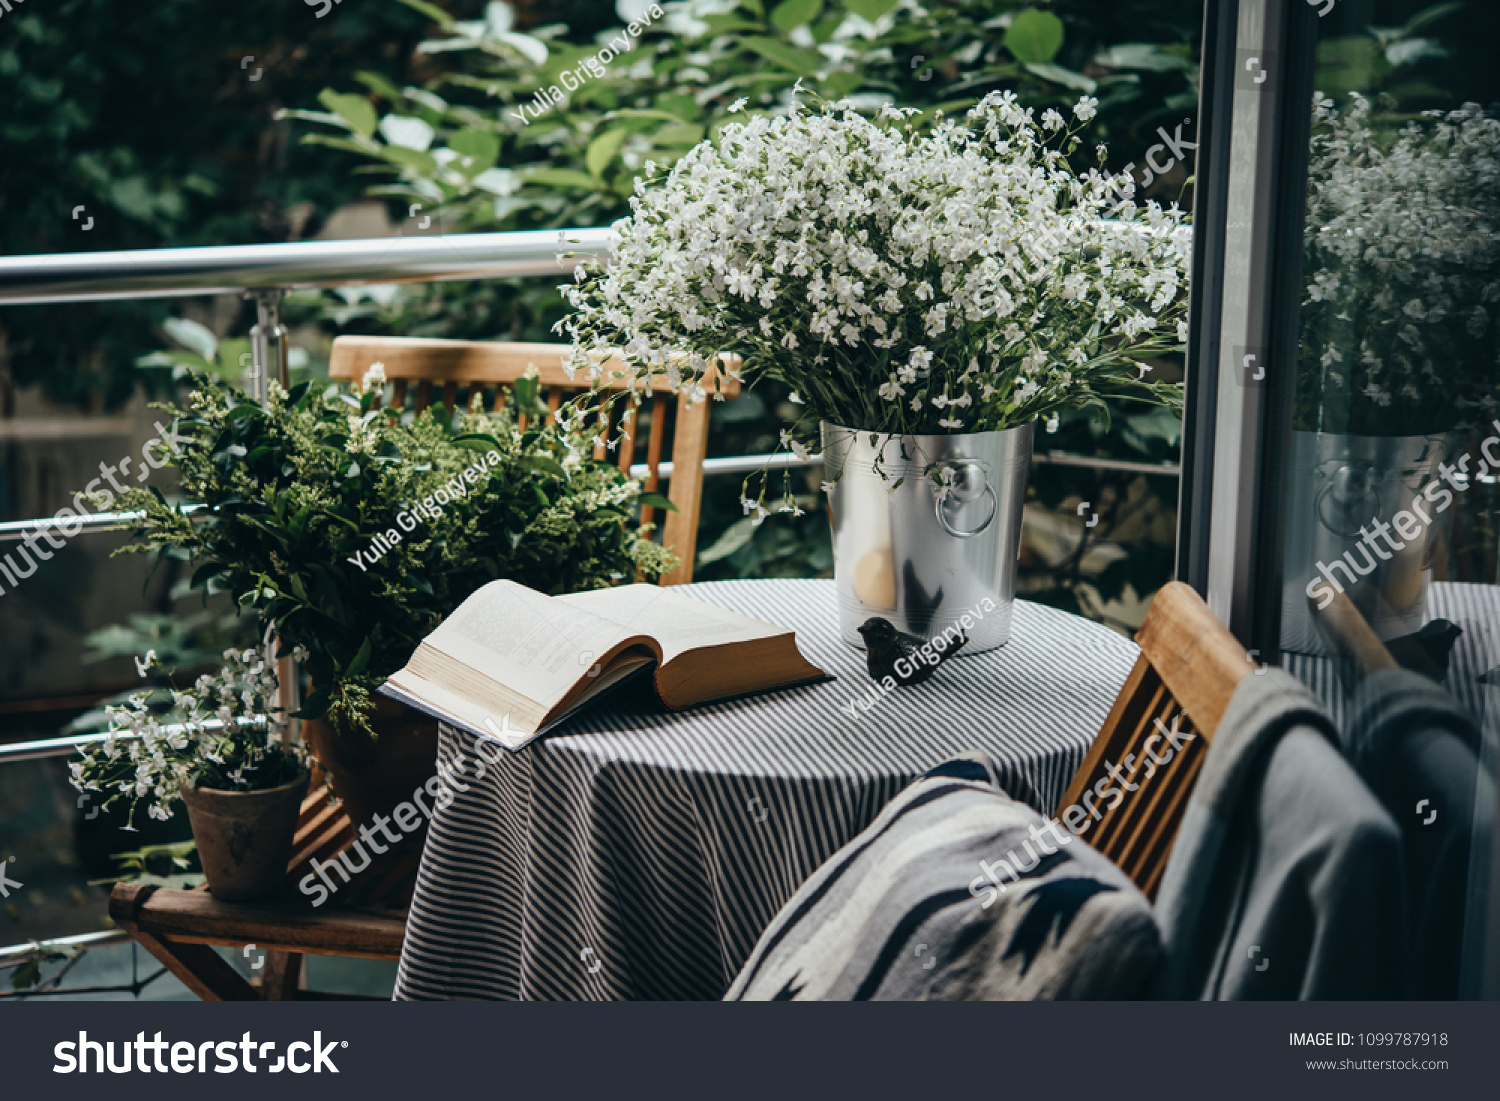 Small table, book and flowers on a beautiful terrace or balcony #1099787918